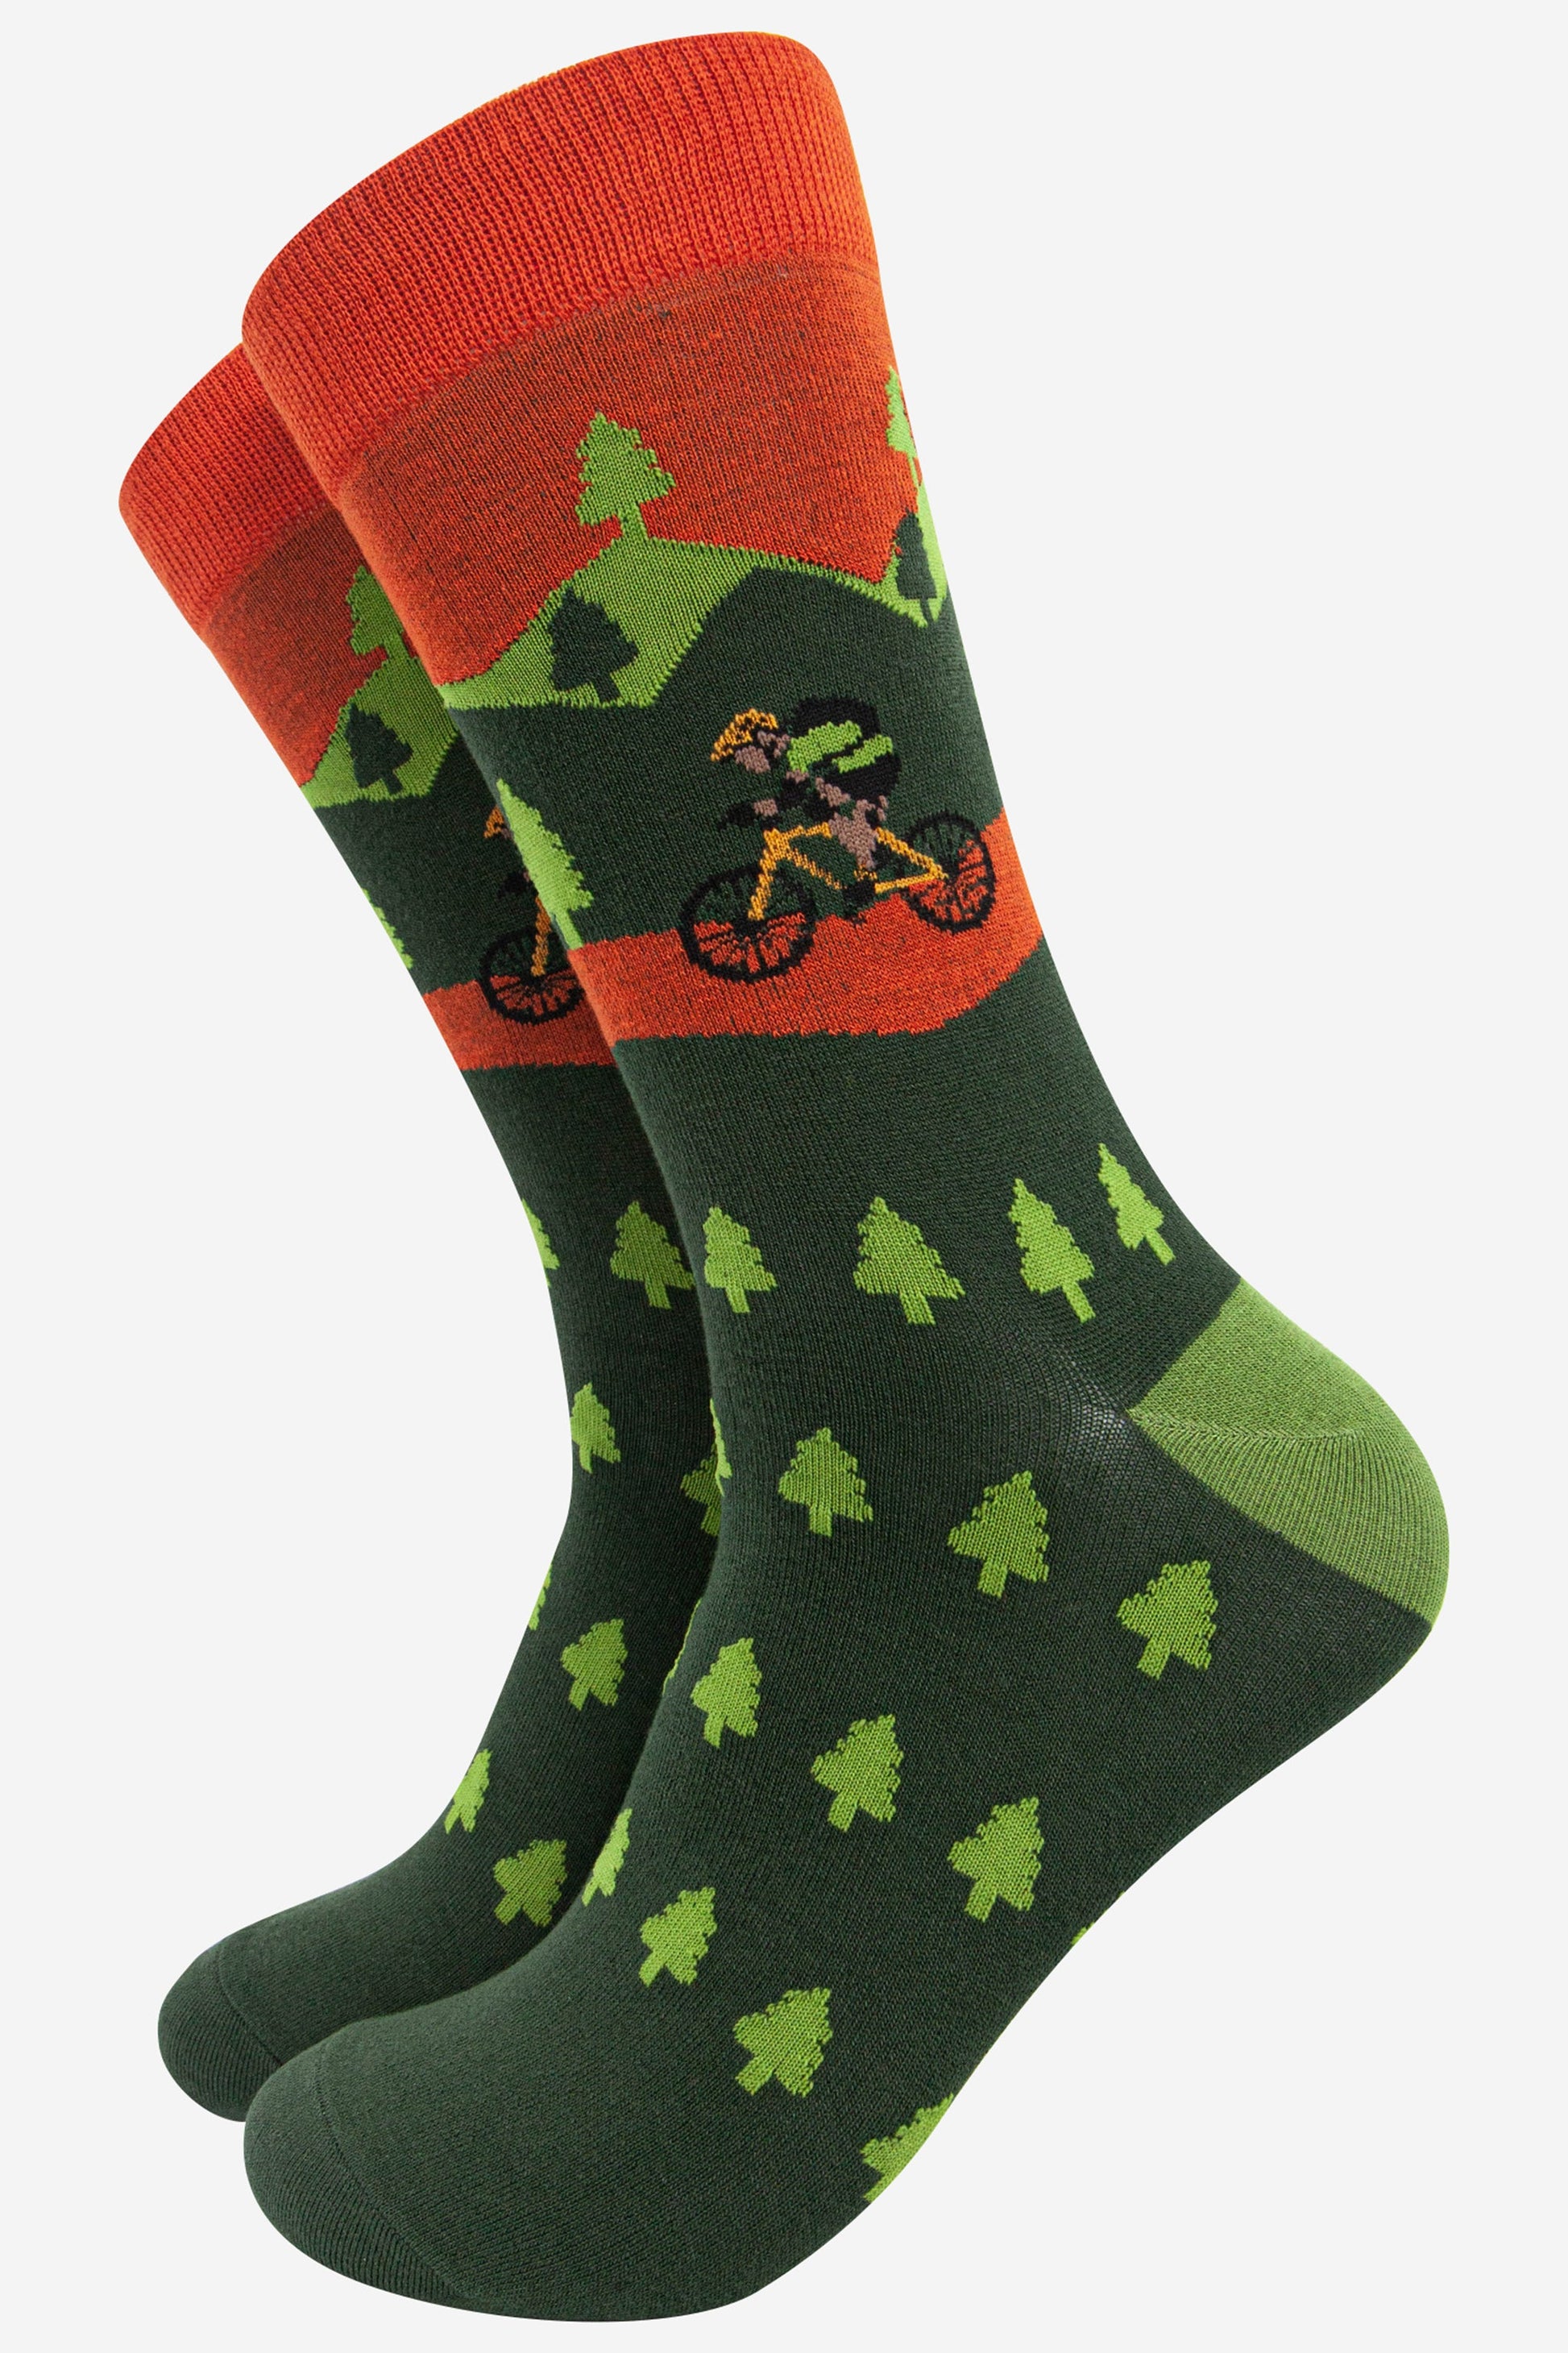 green and orange bamboo sock featuring a person biking in a forest on a mountain bike